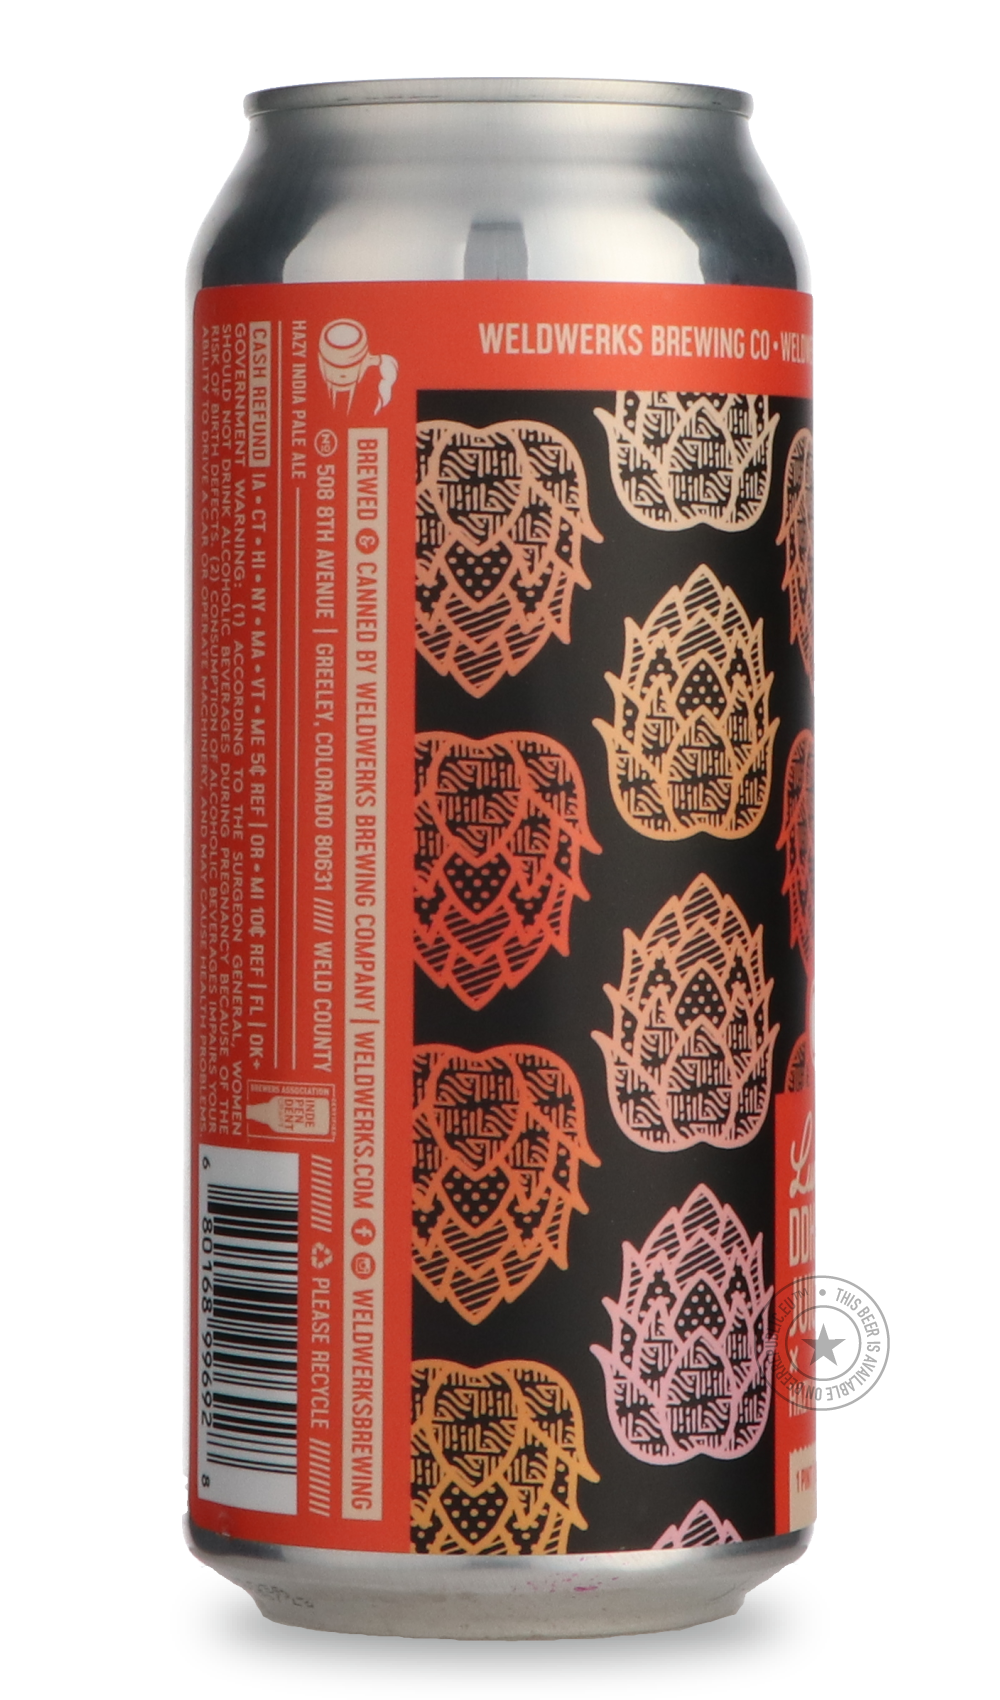 -WeldWerks- Luminosa DDH Juicy Bits-IPA- Only @ Beer Republic - The best online beer store for American & Canadian craft beer - Buy beer online from the USA and Canada - Bier online kopen - Amerikaans bier kopen - Craft beer store - Craft beer kopen - Amerikanisch bier kaufen - Bier online kaufen - Acheter biere online - IPA - Stout - Porter - New England IPA - Hazy IPA - Imperial Stout - Barrel Aged - Barrel Aged Imperial Stout - Brown - Dark beer - Blond - Blonde - Pilsner - Lager - Wheat - Weizen - Amber